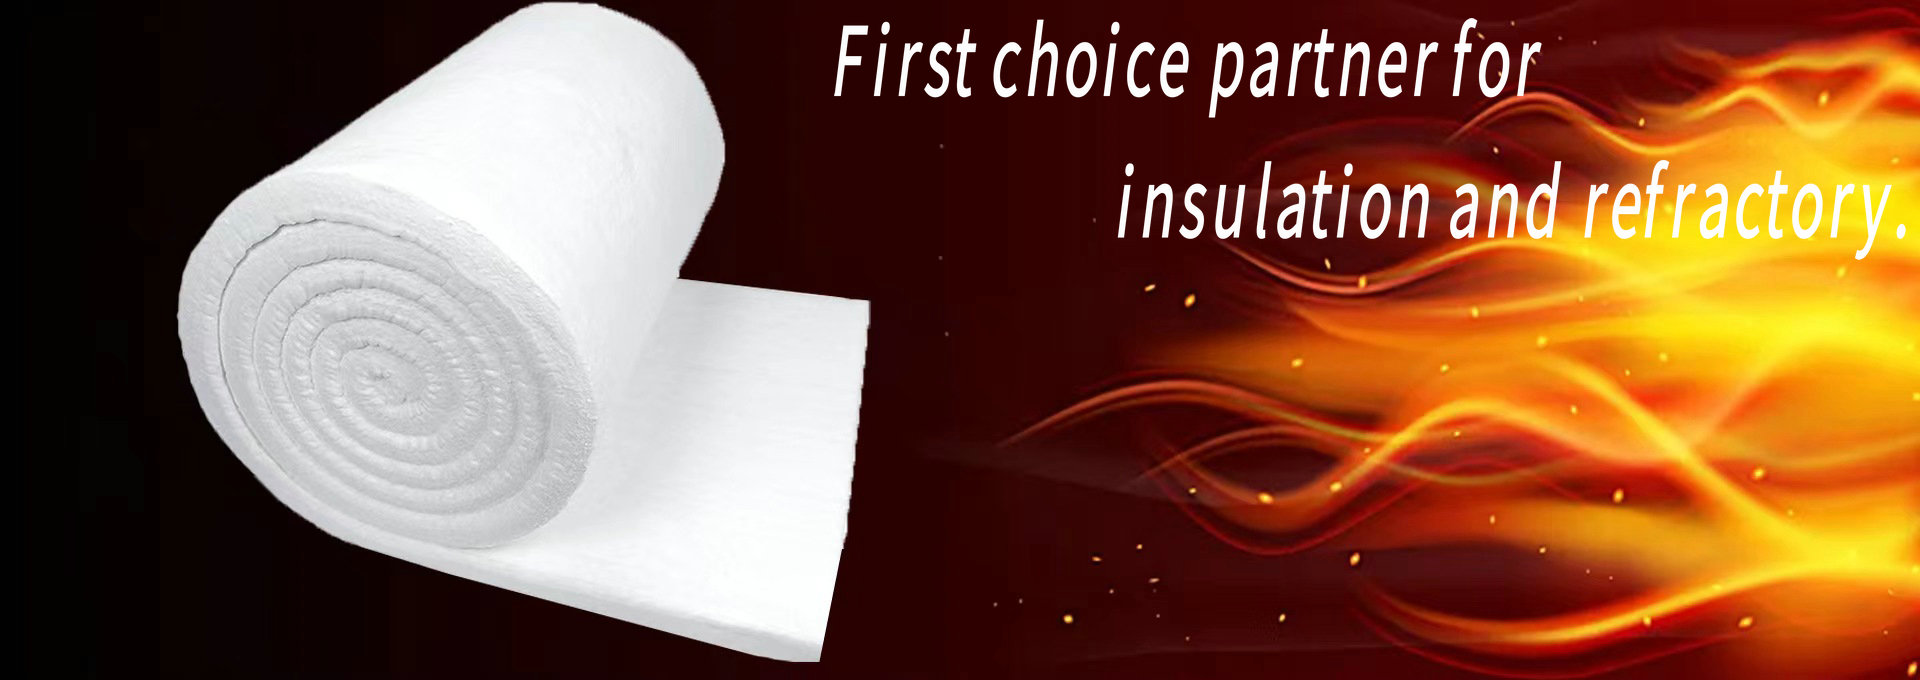 First choice partner for insulation and refractory.